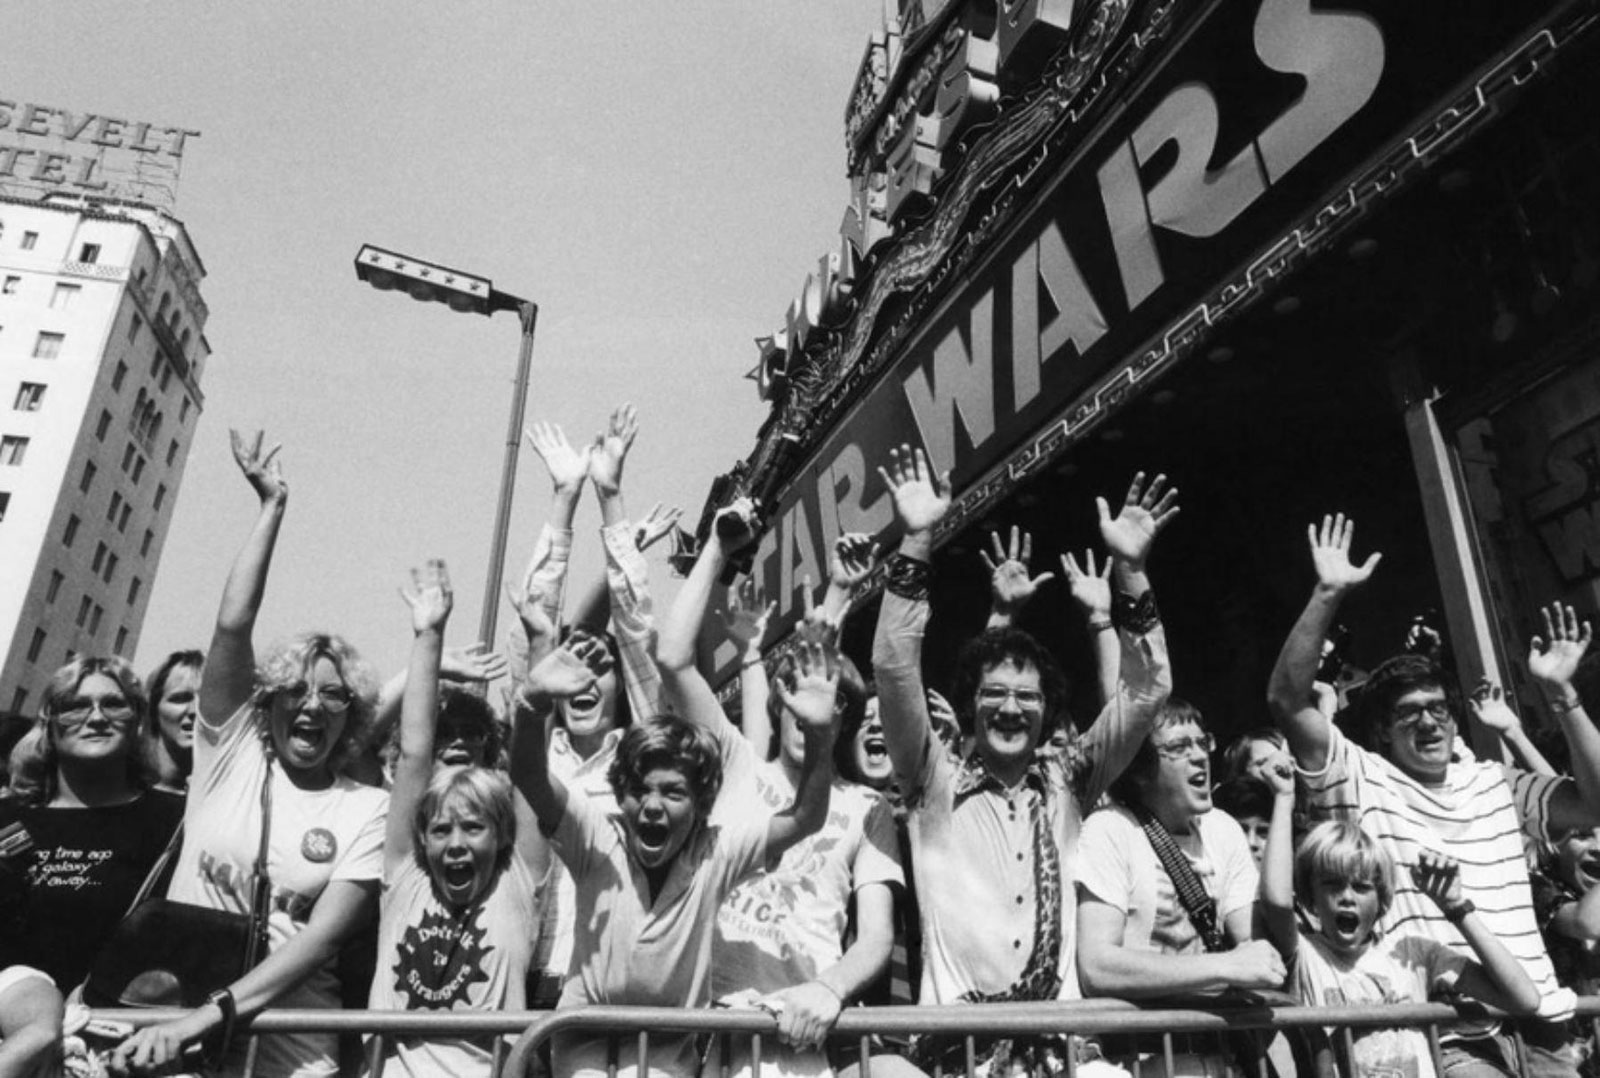 Opening day of George Lucas's Star Wars at Grauman's Chinese theater, May 25, 1977